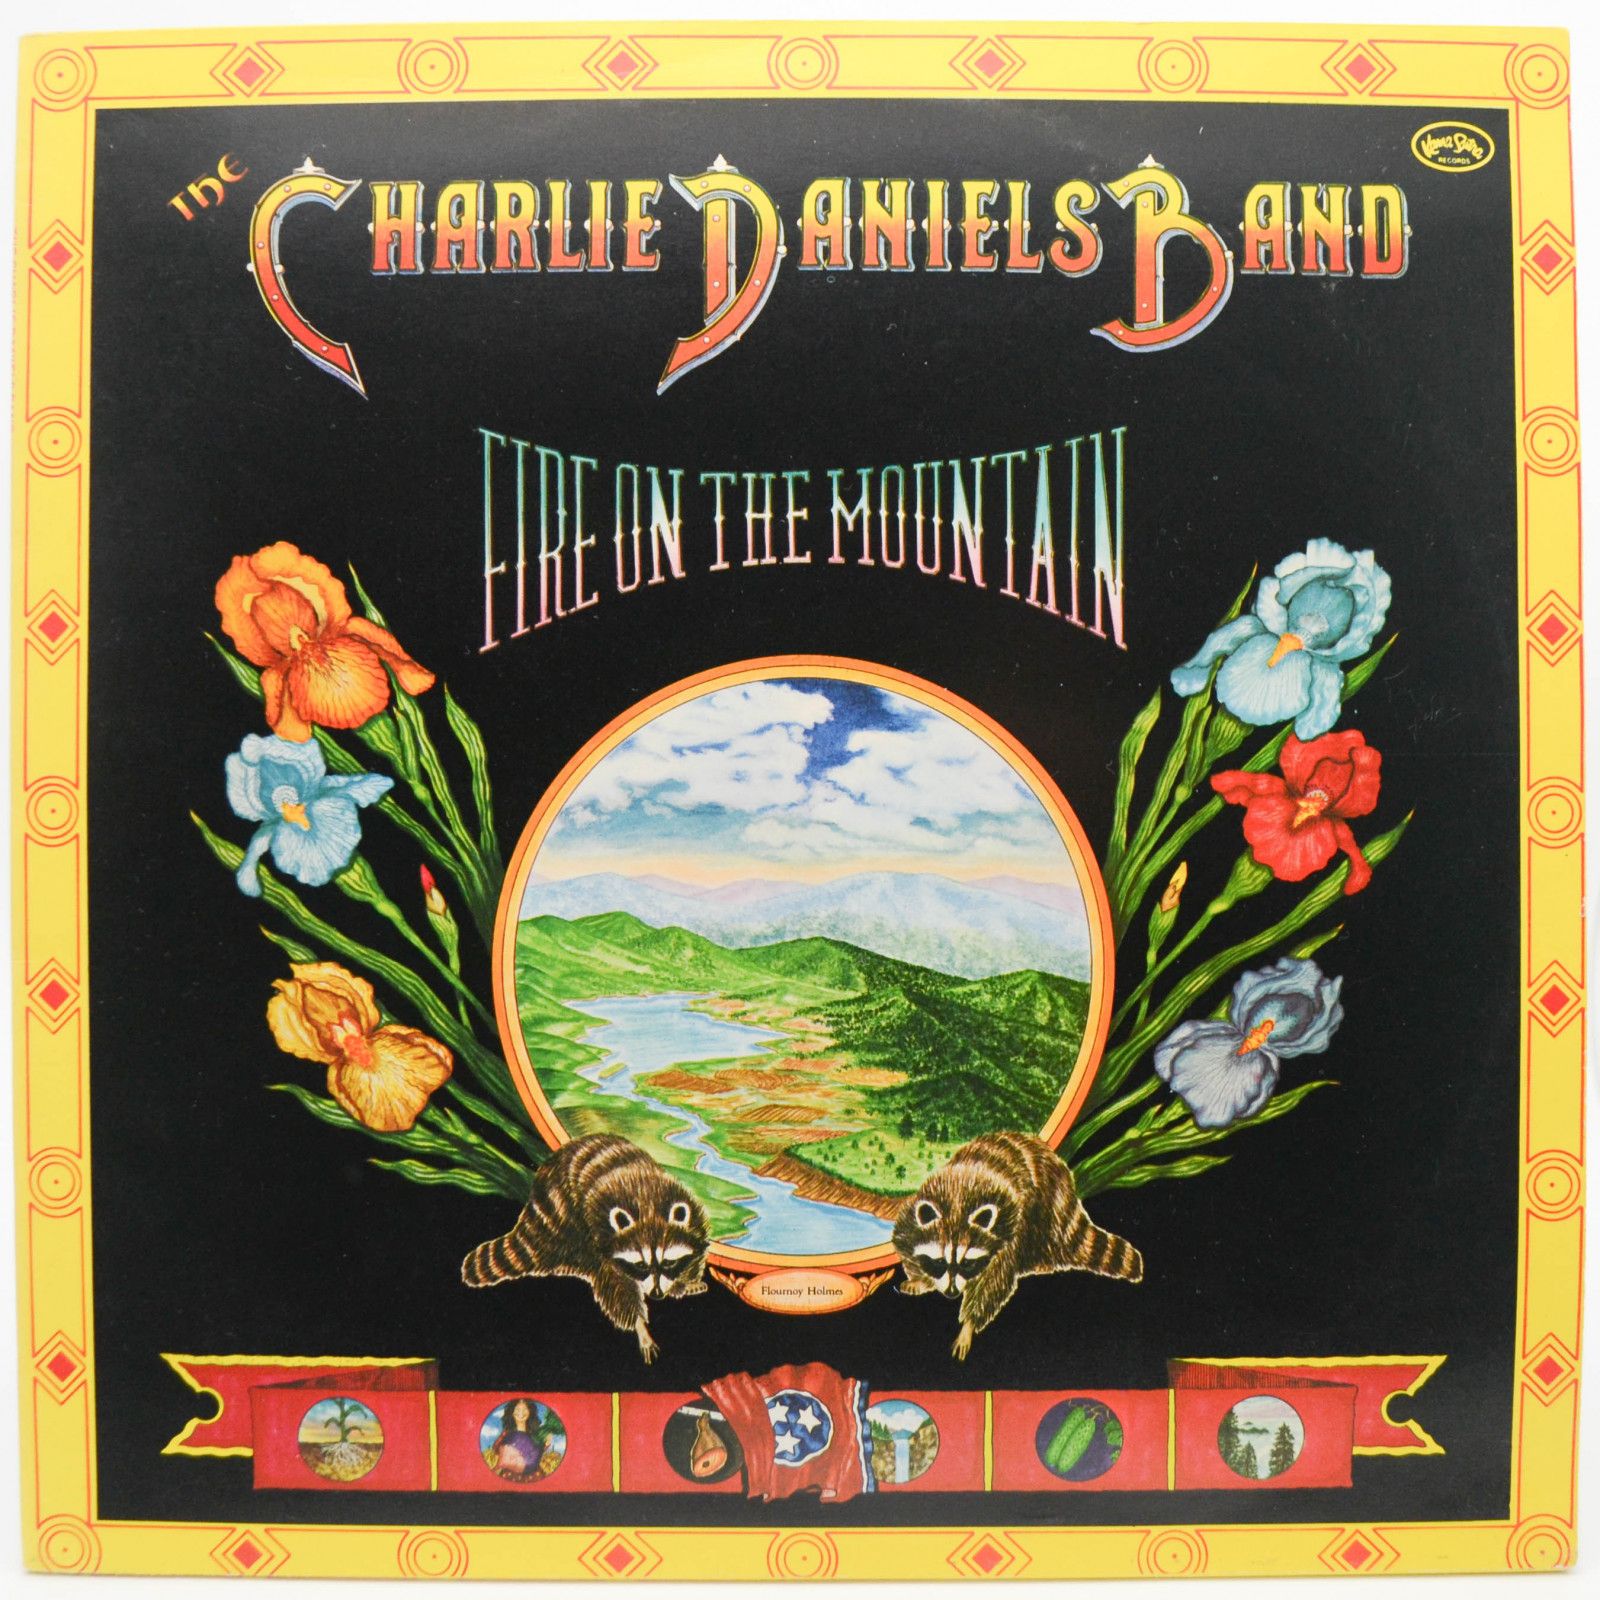 Charlie Daniels Band — Fire On The Mountain (UK), 1975